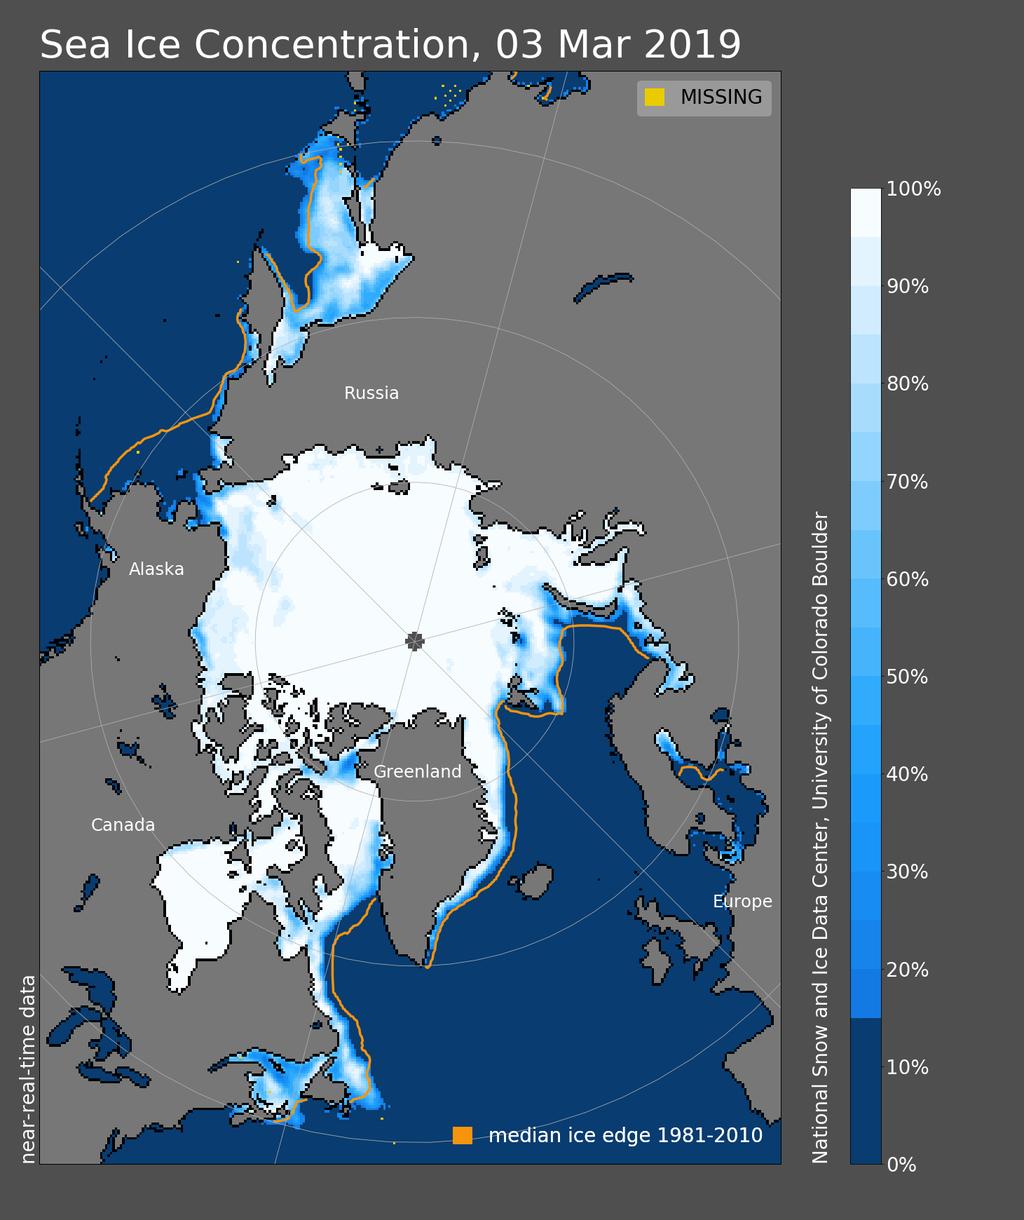 Figure 5: Daily Arctic Sea Ice concentration, March 3, 2019, median ice edge for the 1981-2010 reference period in yellow. Very low sea ice concentration in the Bering Sea. Image: NSIDC (nsidc.